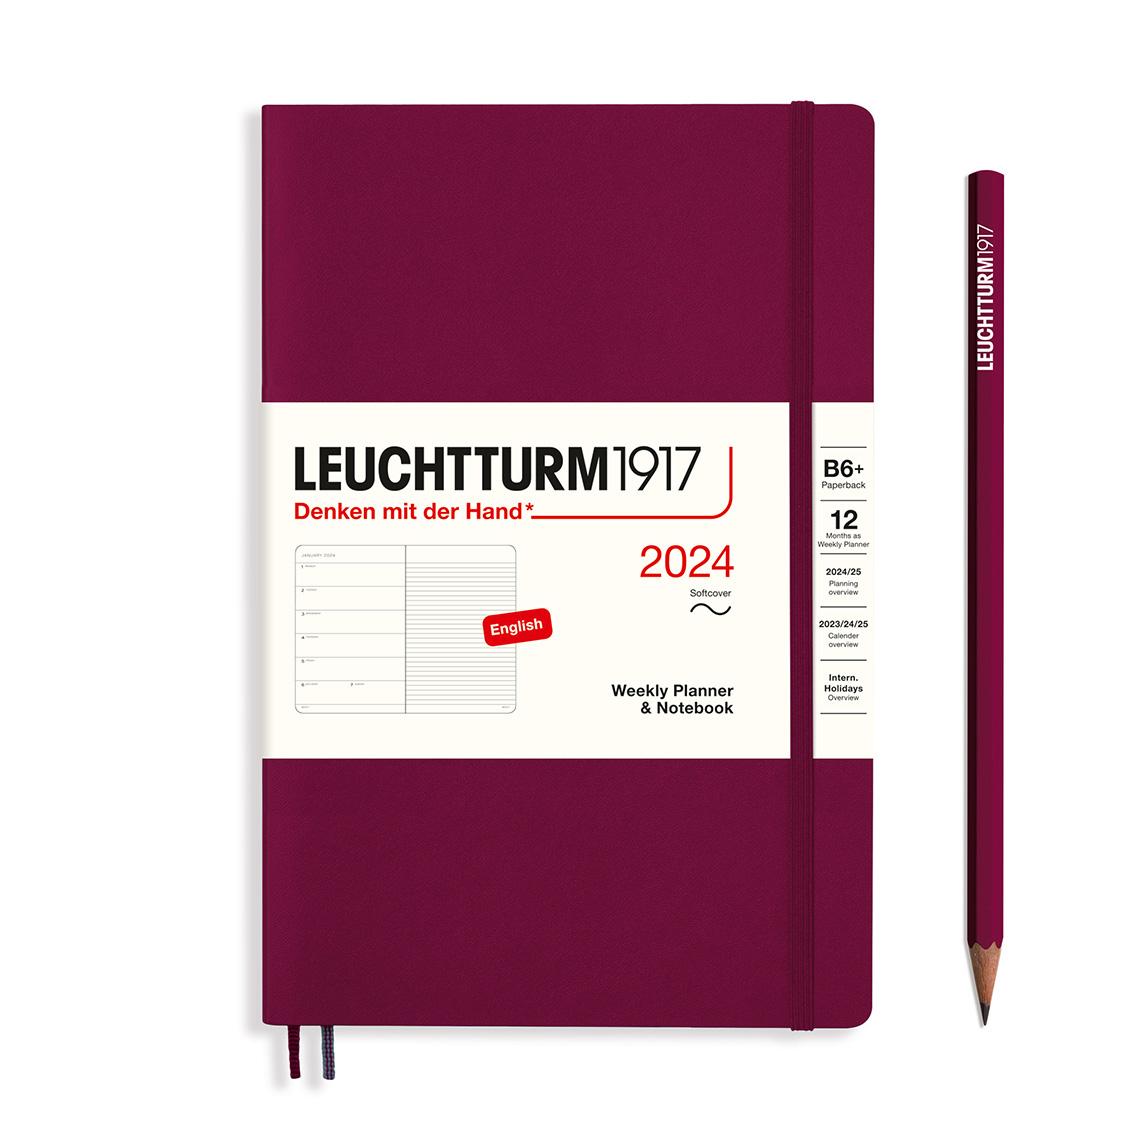 softcover weekly planner and notebook B6+ port red by Leuchtturm1917